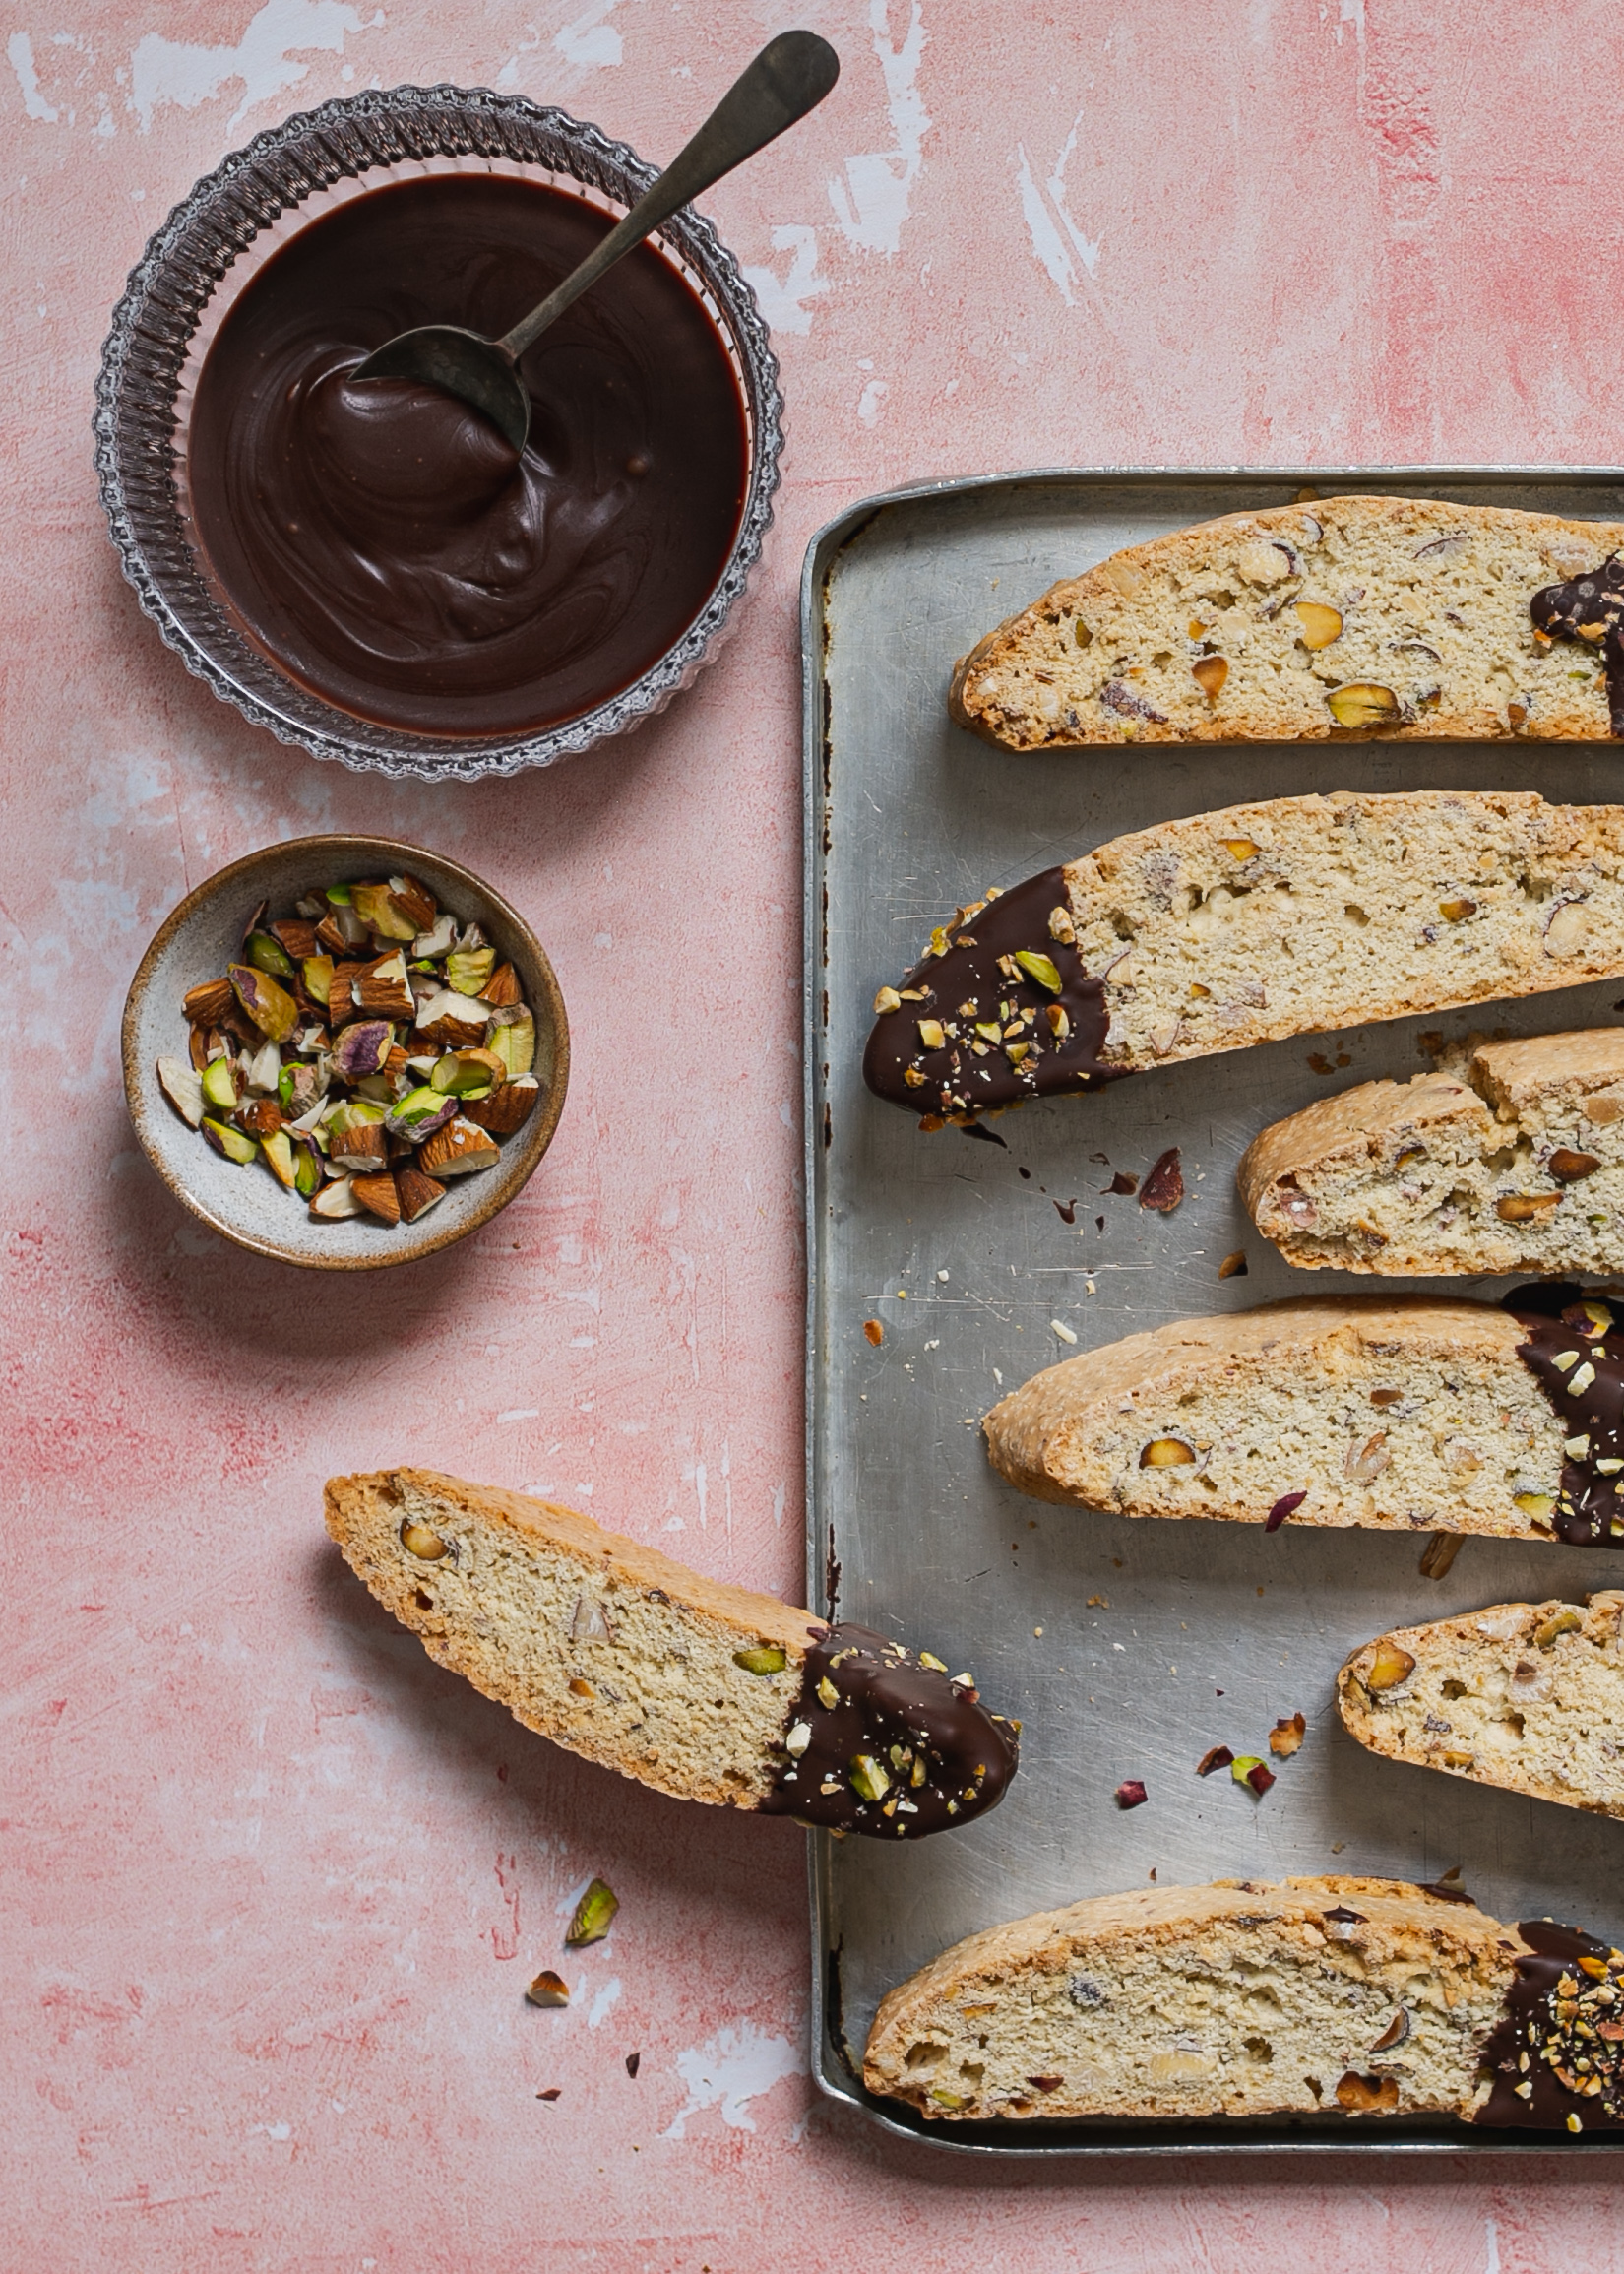 Almond, hazelnut and pistachio chocolate biscotti - She Can't Eat What